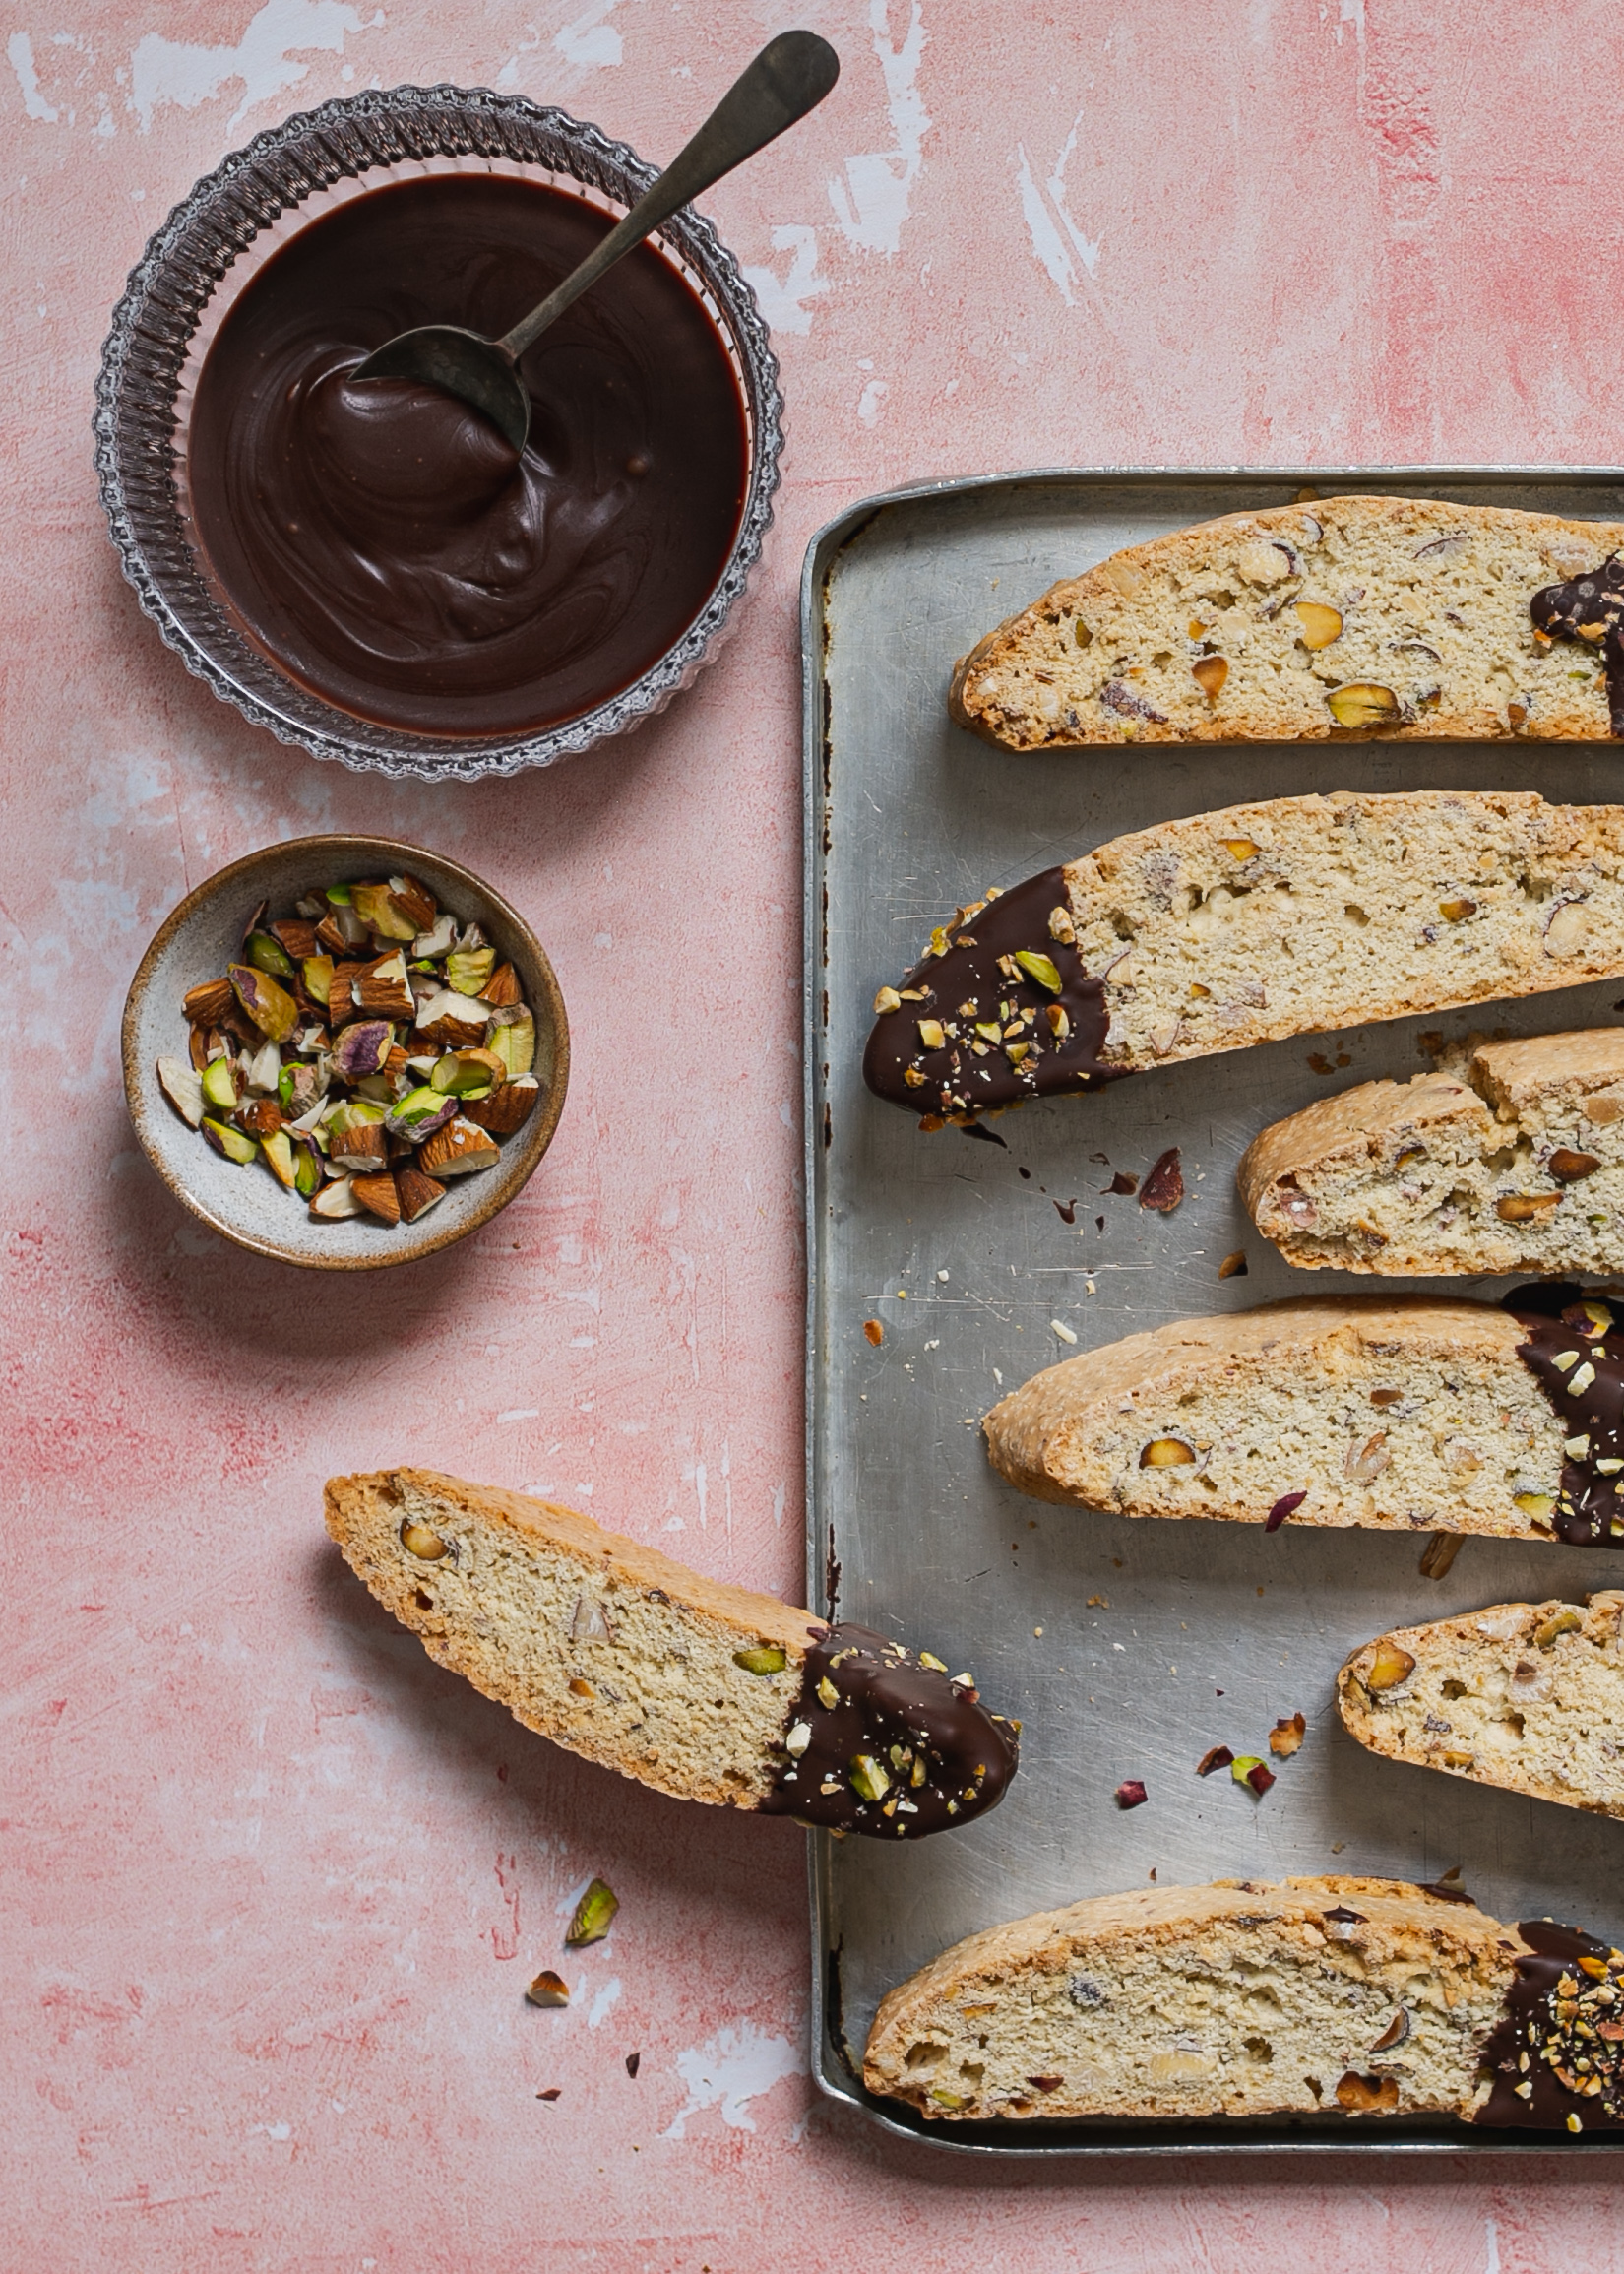 Almond, hazelnut and pistachio chocolate biscotti - She Can't Eat What